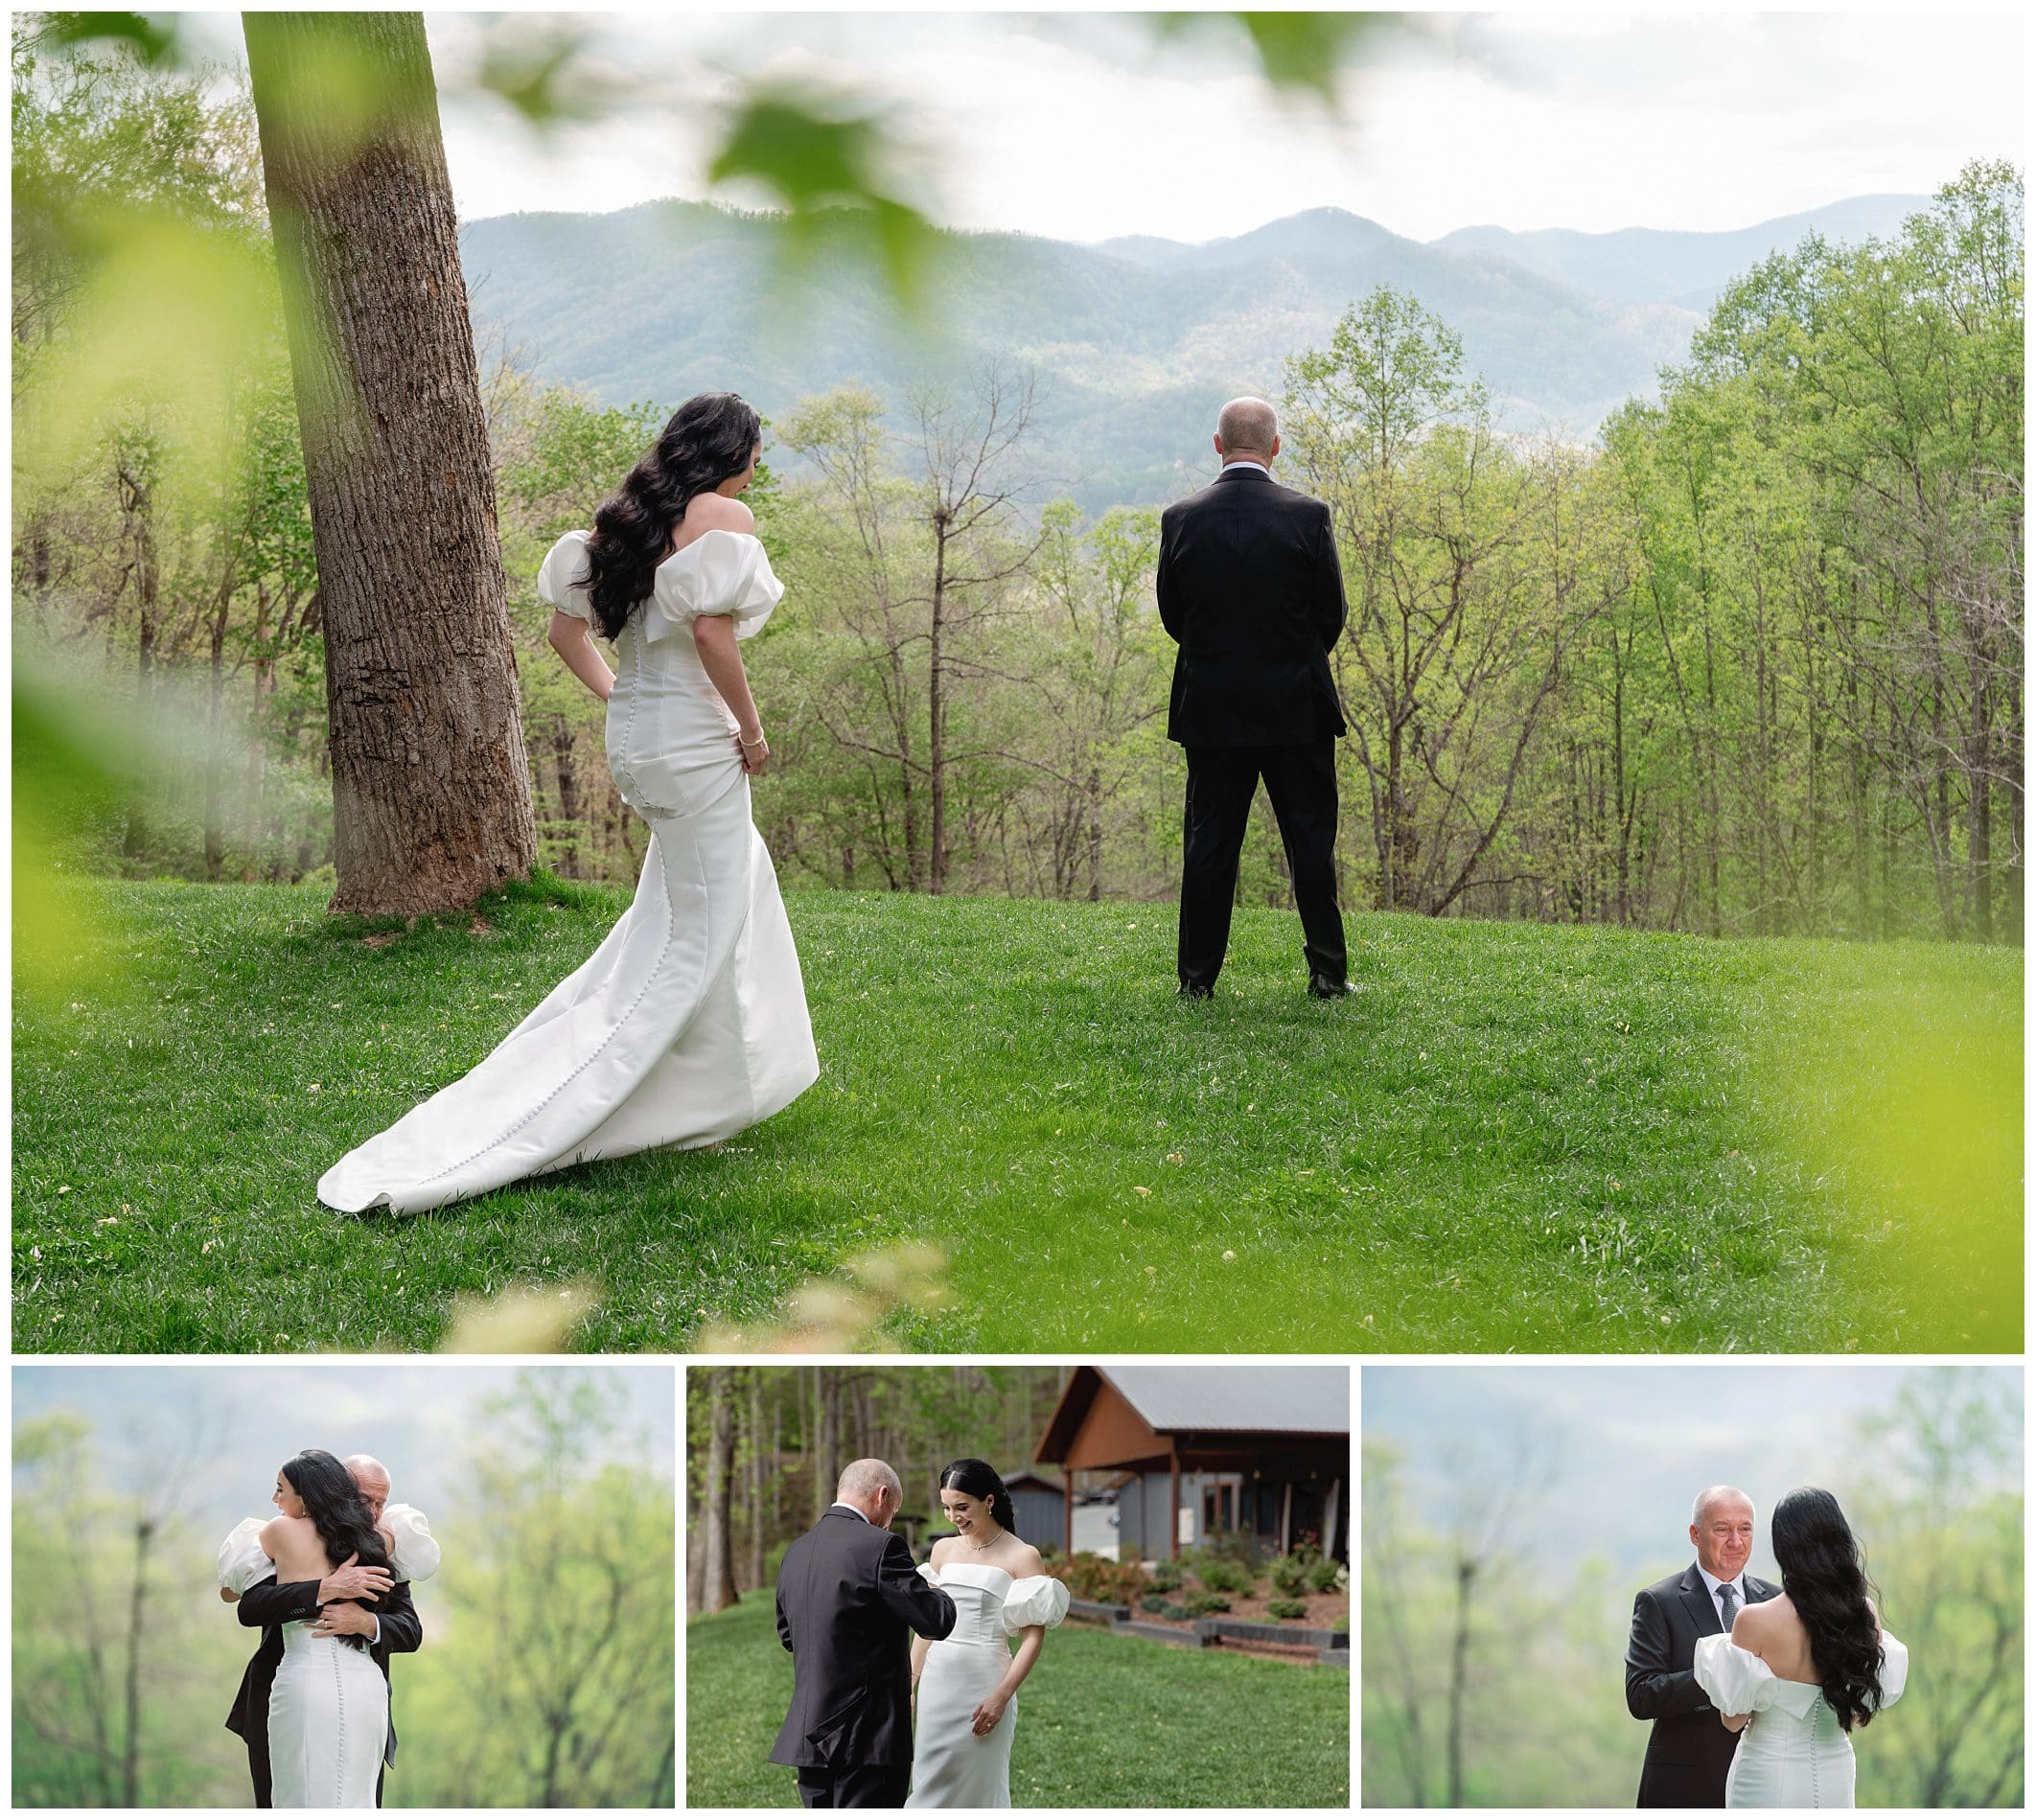 Collage of a wedding couple outdoors: top image shows them facing mountains, bottom left kissing, bottom middle embracing, bottom right smiling at each other.